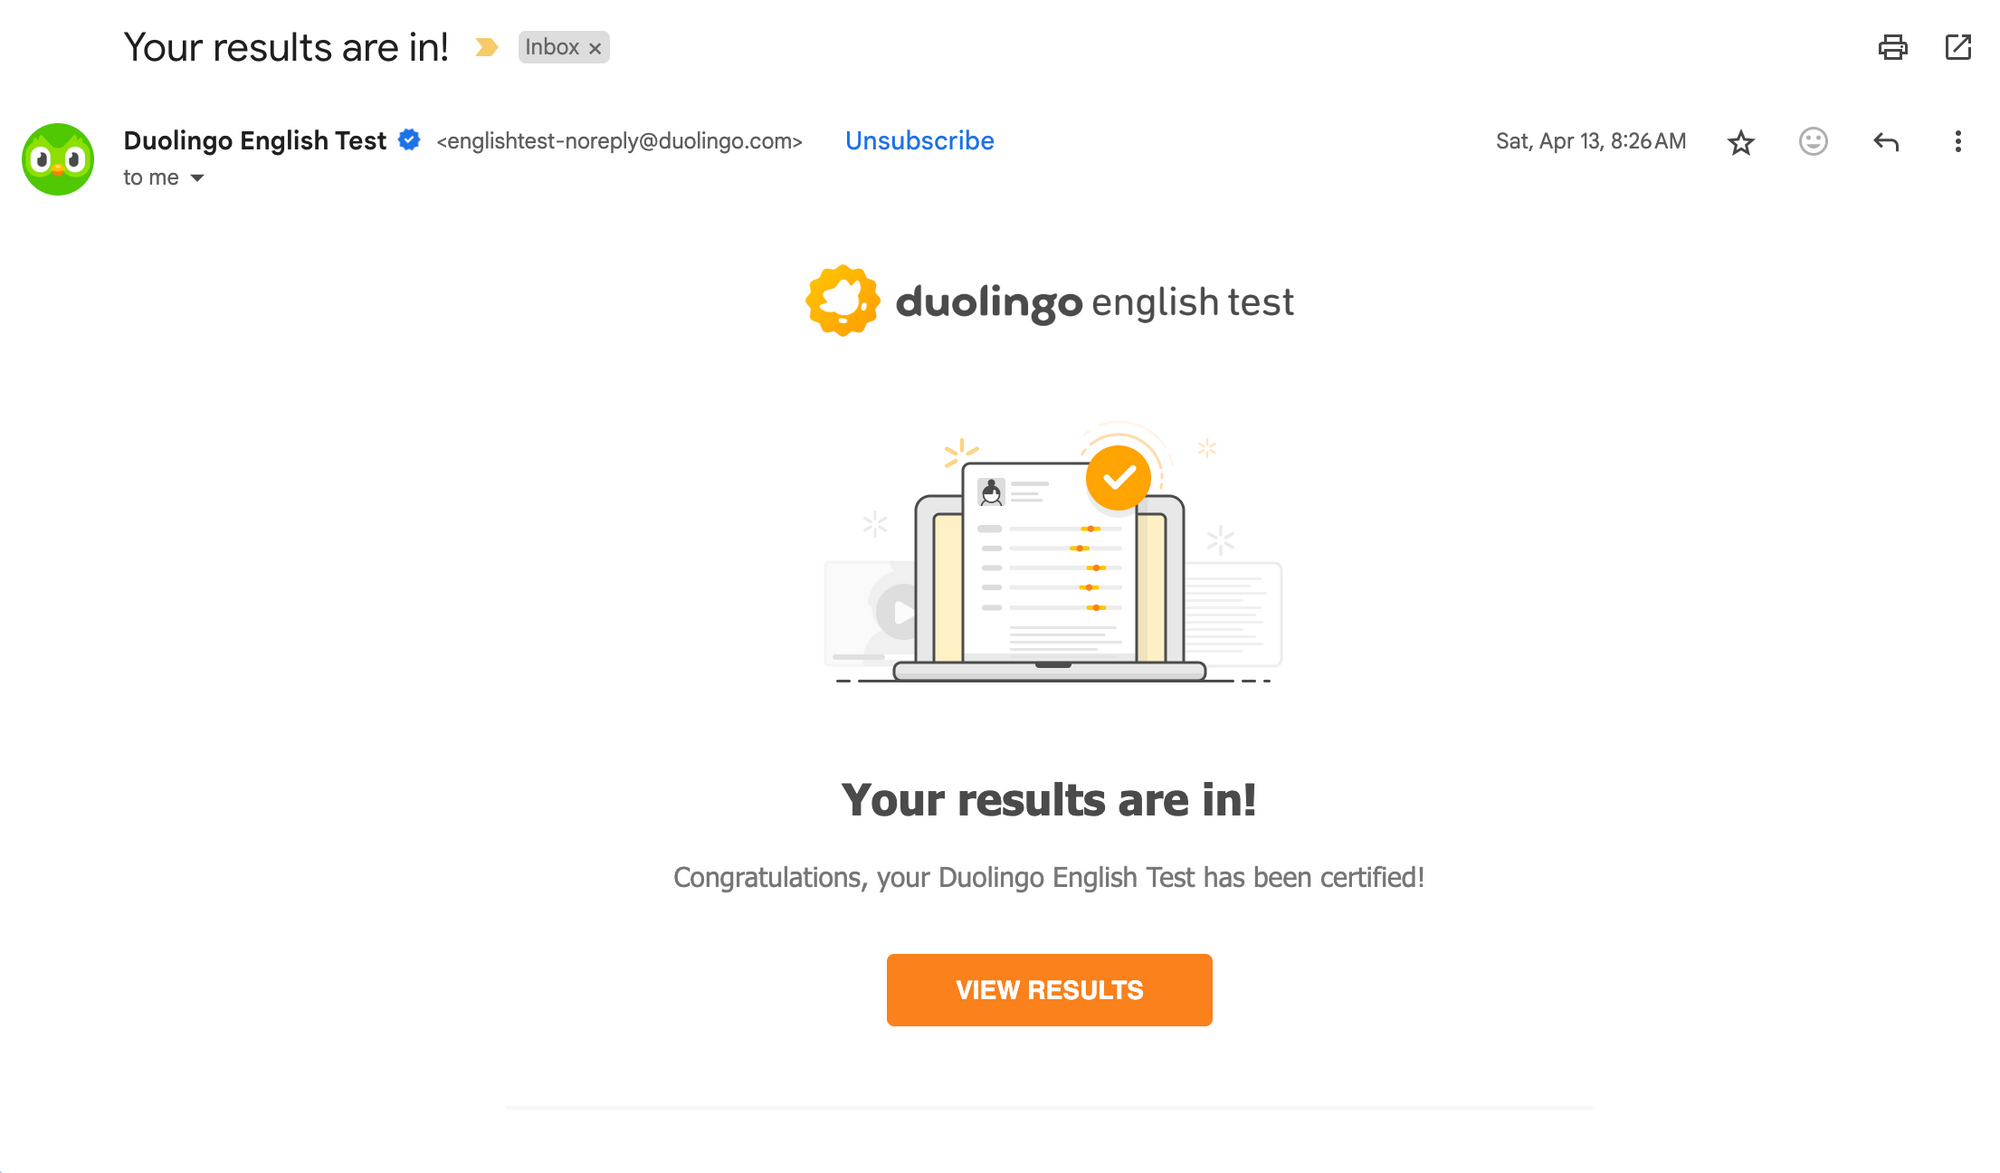 The email you receive from Duolingo informing you that your DET results are ready.